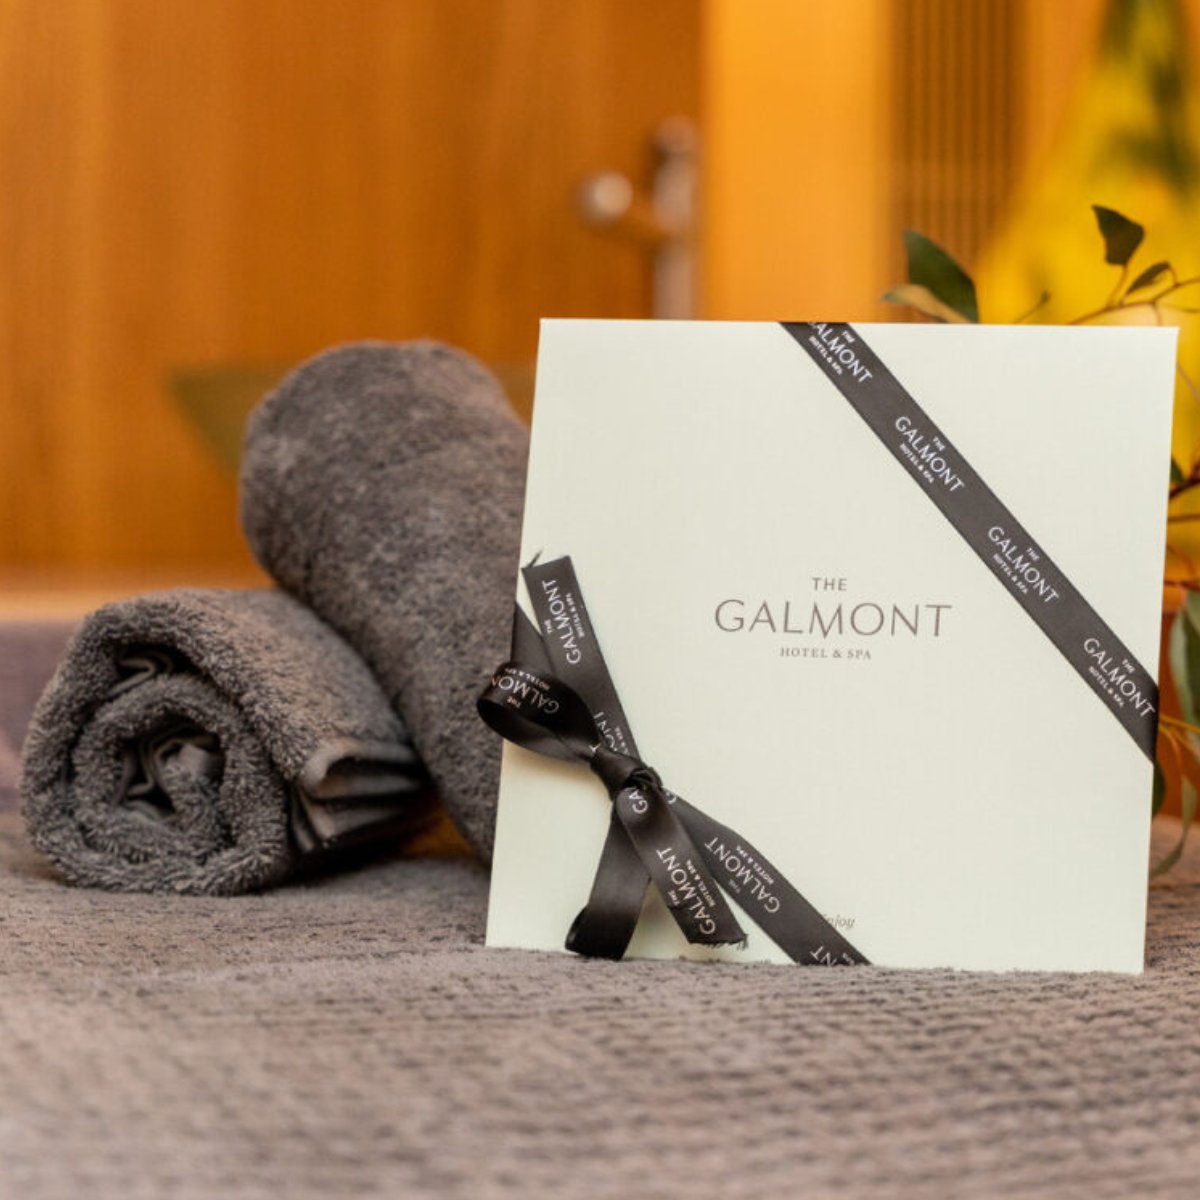 Treat your mum to some well deserved pampering this Mother's Day at Spirit One Spa. Choose from: 🌸Mother's Day Spa Offer 🌸Mother's Day Gift Voucher Find out more: thegalmont.com/en/Mothers%20D…